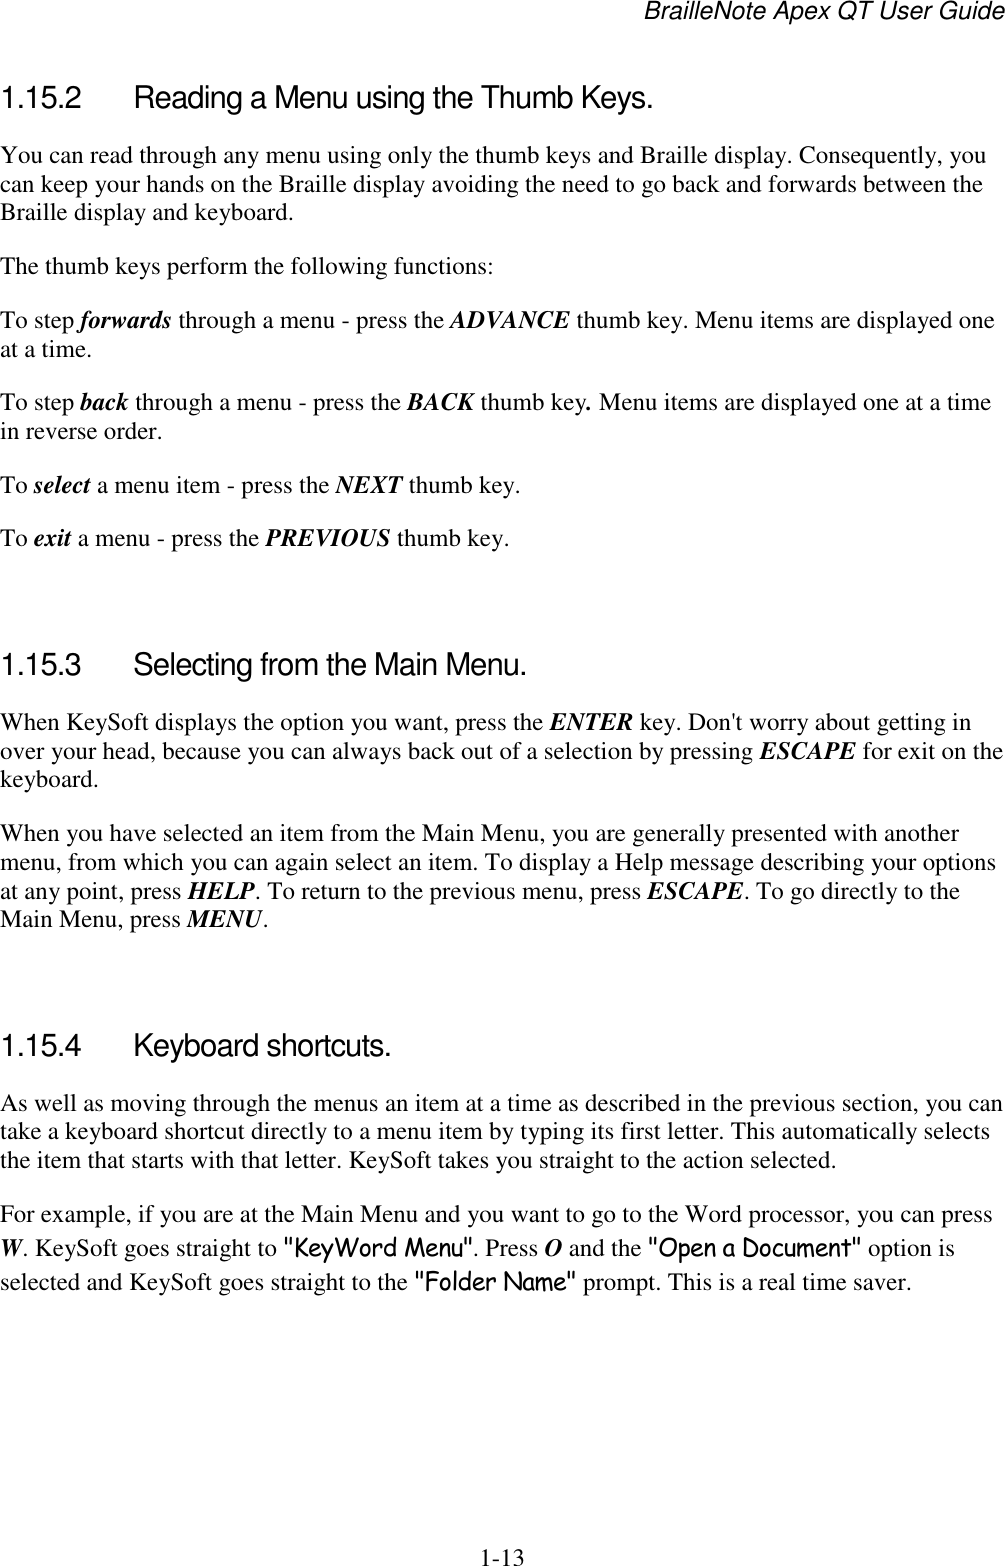 BrailleNote Apex QT User Guide  1-13   1.15.2  Reading a Menu using the Thumb Keys. You can read through any menu using only the thumb keys and Braille display. Consequently, you can keep your hands on the Braille display avoiding the need to go back and forwards between the Braille display and keyboard. The thumb keys perform the following functions: To step forwards through a menu - press the ADVANCE thumb key. Menu items are displayed one at a time. To step back through a menu - press the BACK thumb key. Menu items are displayed one at a time in reverse order. To select a menu item - press the NEXT thumb key. To exit a menu - press the PREVIOUS thumb key.   1.15.3  Selecting from the Main Menu. When KeySoft displays the option you want, press the ENTER key. Don&apos;t worry about getting in over your head, because you can always back out of a selection by pressing ESCAPE for exit on the keyboard. When you have selected an item from the Main Menu, you are generally presented with another menu, from which you can again select an item. To display a Help message describing your options at any point, press HELP. To return to the previous menu, press ESCAPE. To go directly to the Main Menu, press MENU.   1.15.4  Keyboard shortcuts. As well as moving through the menus an item at a time as described in the previous section, you can take a keyboard shortcut directly to a menu item by typing its first letter. This automatically selects the item that starts with that letter. KeySoft takes you straight to the action selected. For example, if you are at the Main Menu and you want to go to the Word processor, you can press W. KeySoft goes straight to &quot;KeyWord Menu&quot;. Press O and the &quot;Open a Document&quot; option is selected and KeySoft goes straight to the &quot;Folder Name&quot; prompt. This is a real time saver.   